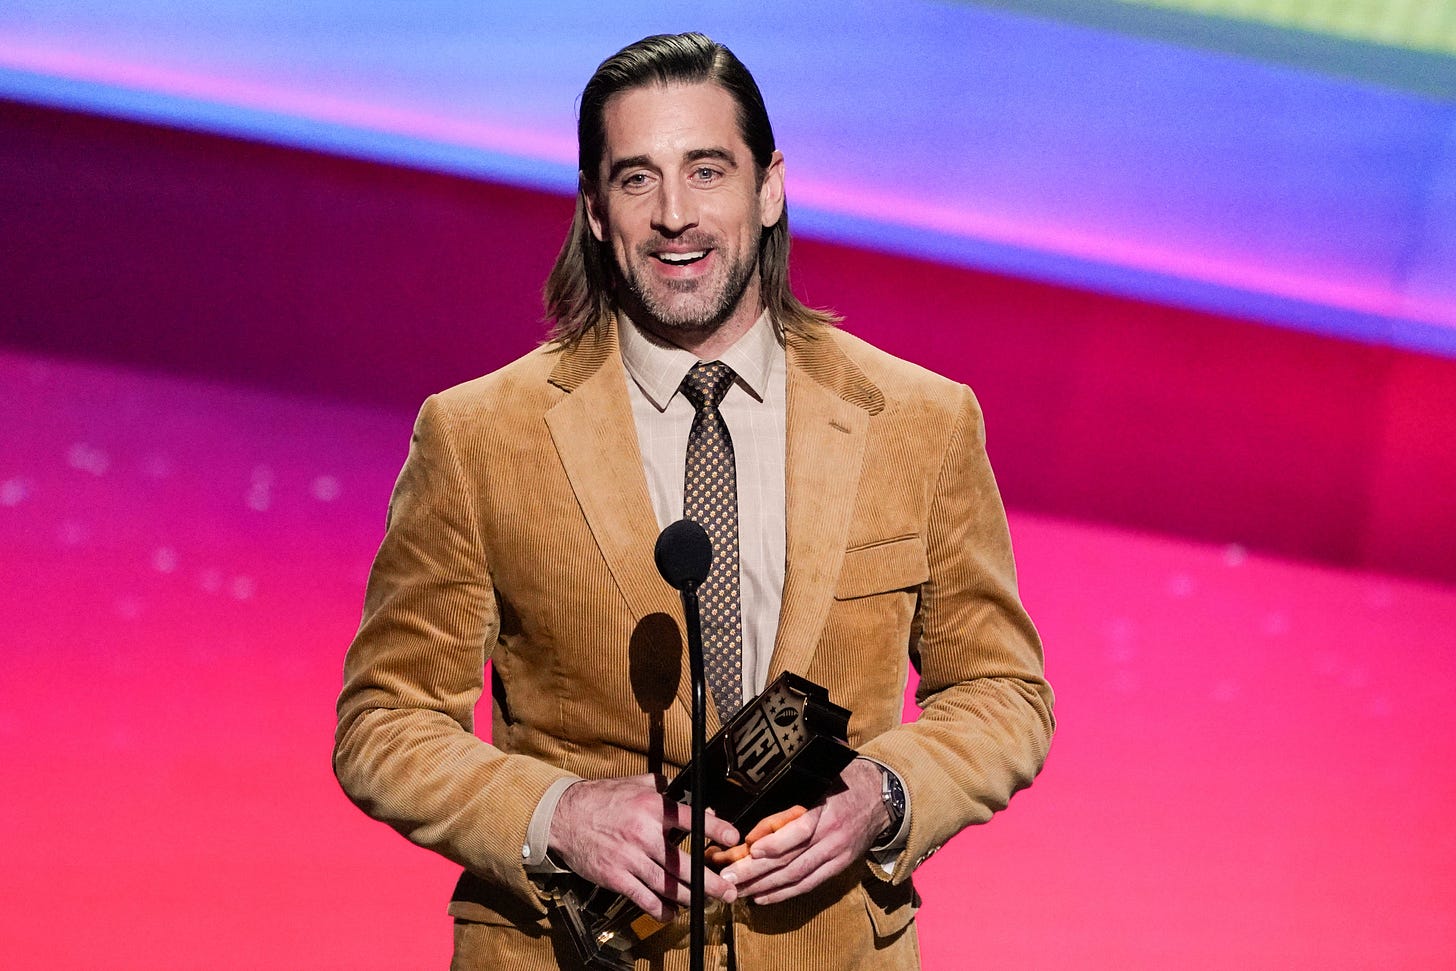 Aaron Rodgers' corduroy suit at 'NFL Honors' rubbed some the wrong way